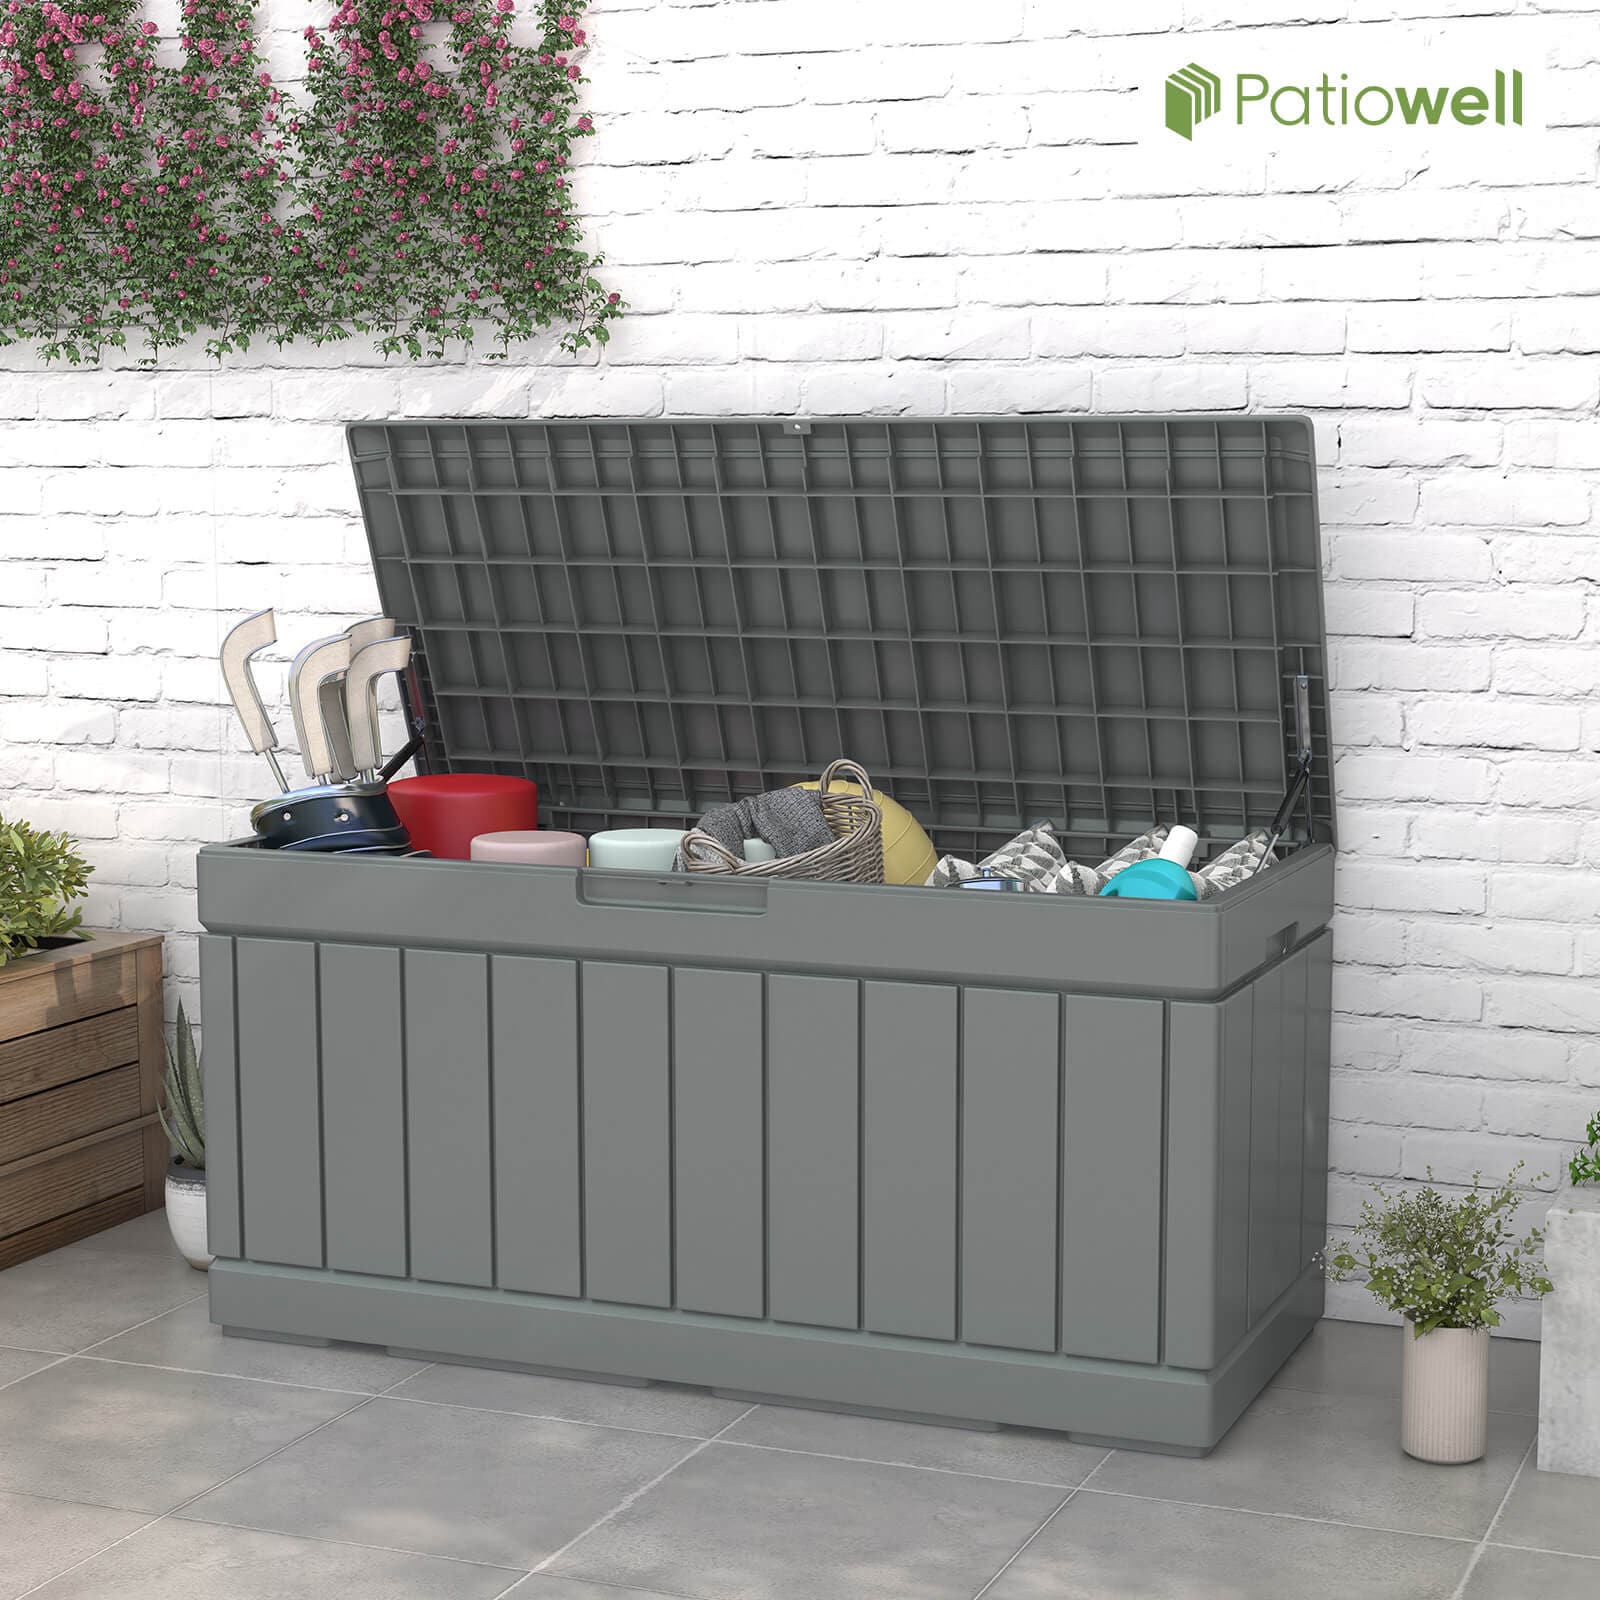 Patiowell 46.4-in L x 20.8-in 82-Gallons Grey Plastic Deck Box in the ...